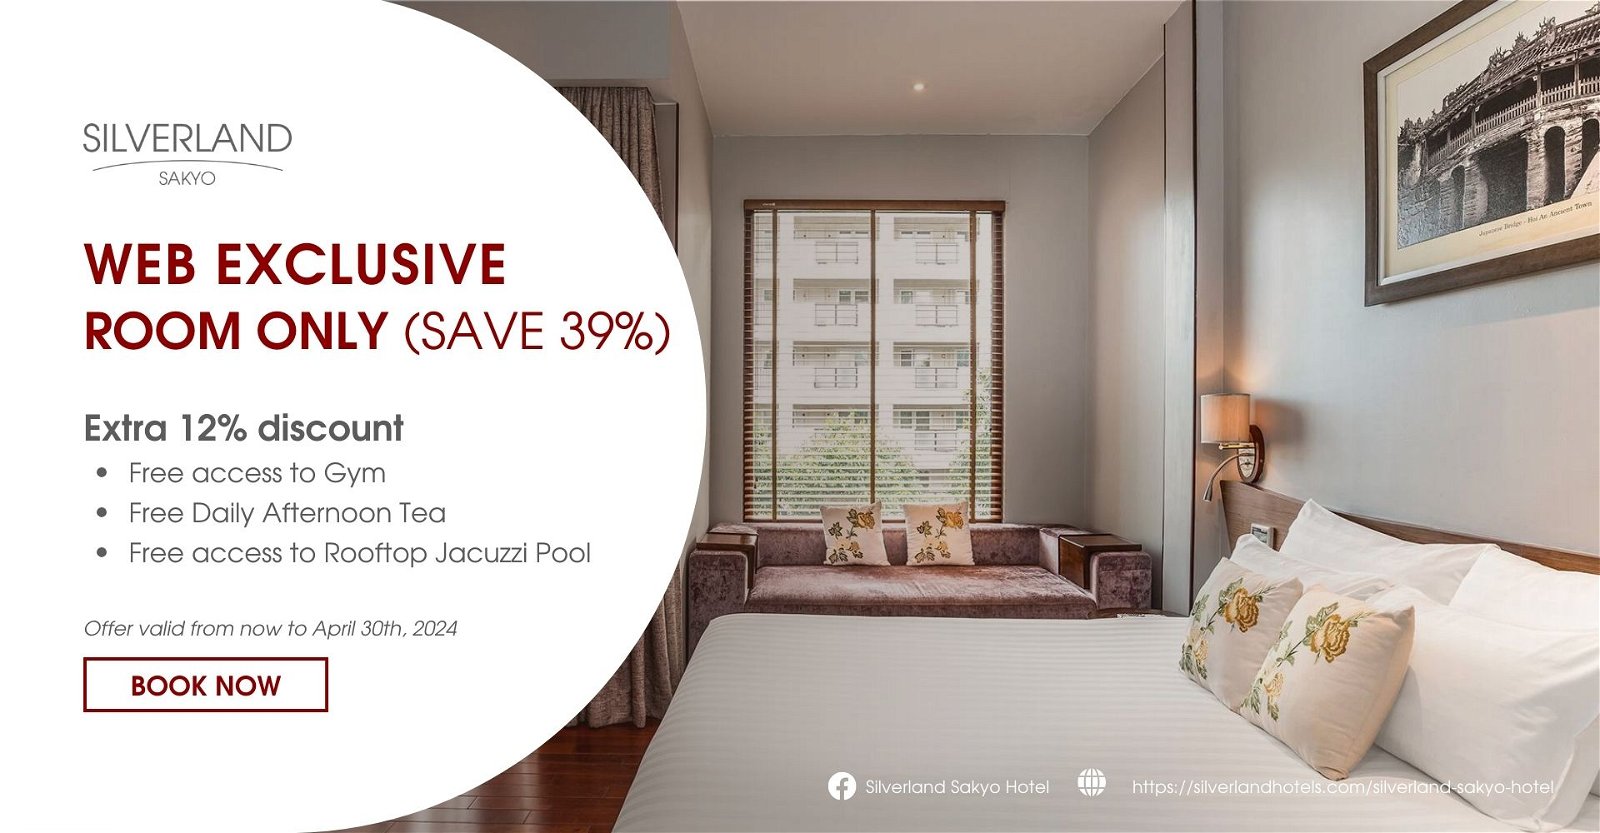 SILVERLAND SAKYO – WEB EXCLUSIVE – ROOM ONLY (SAVE 39%)